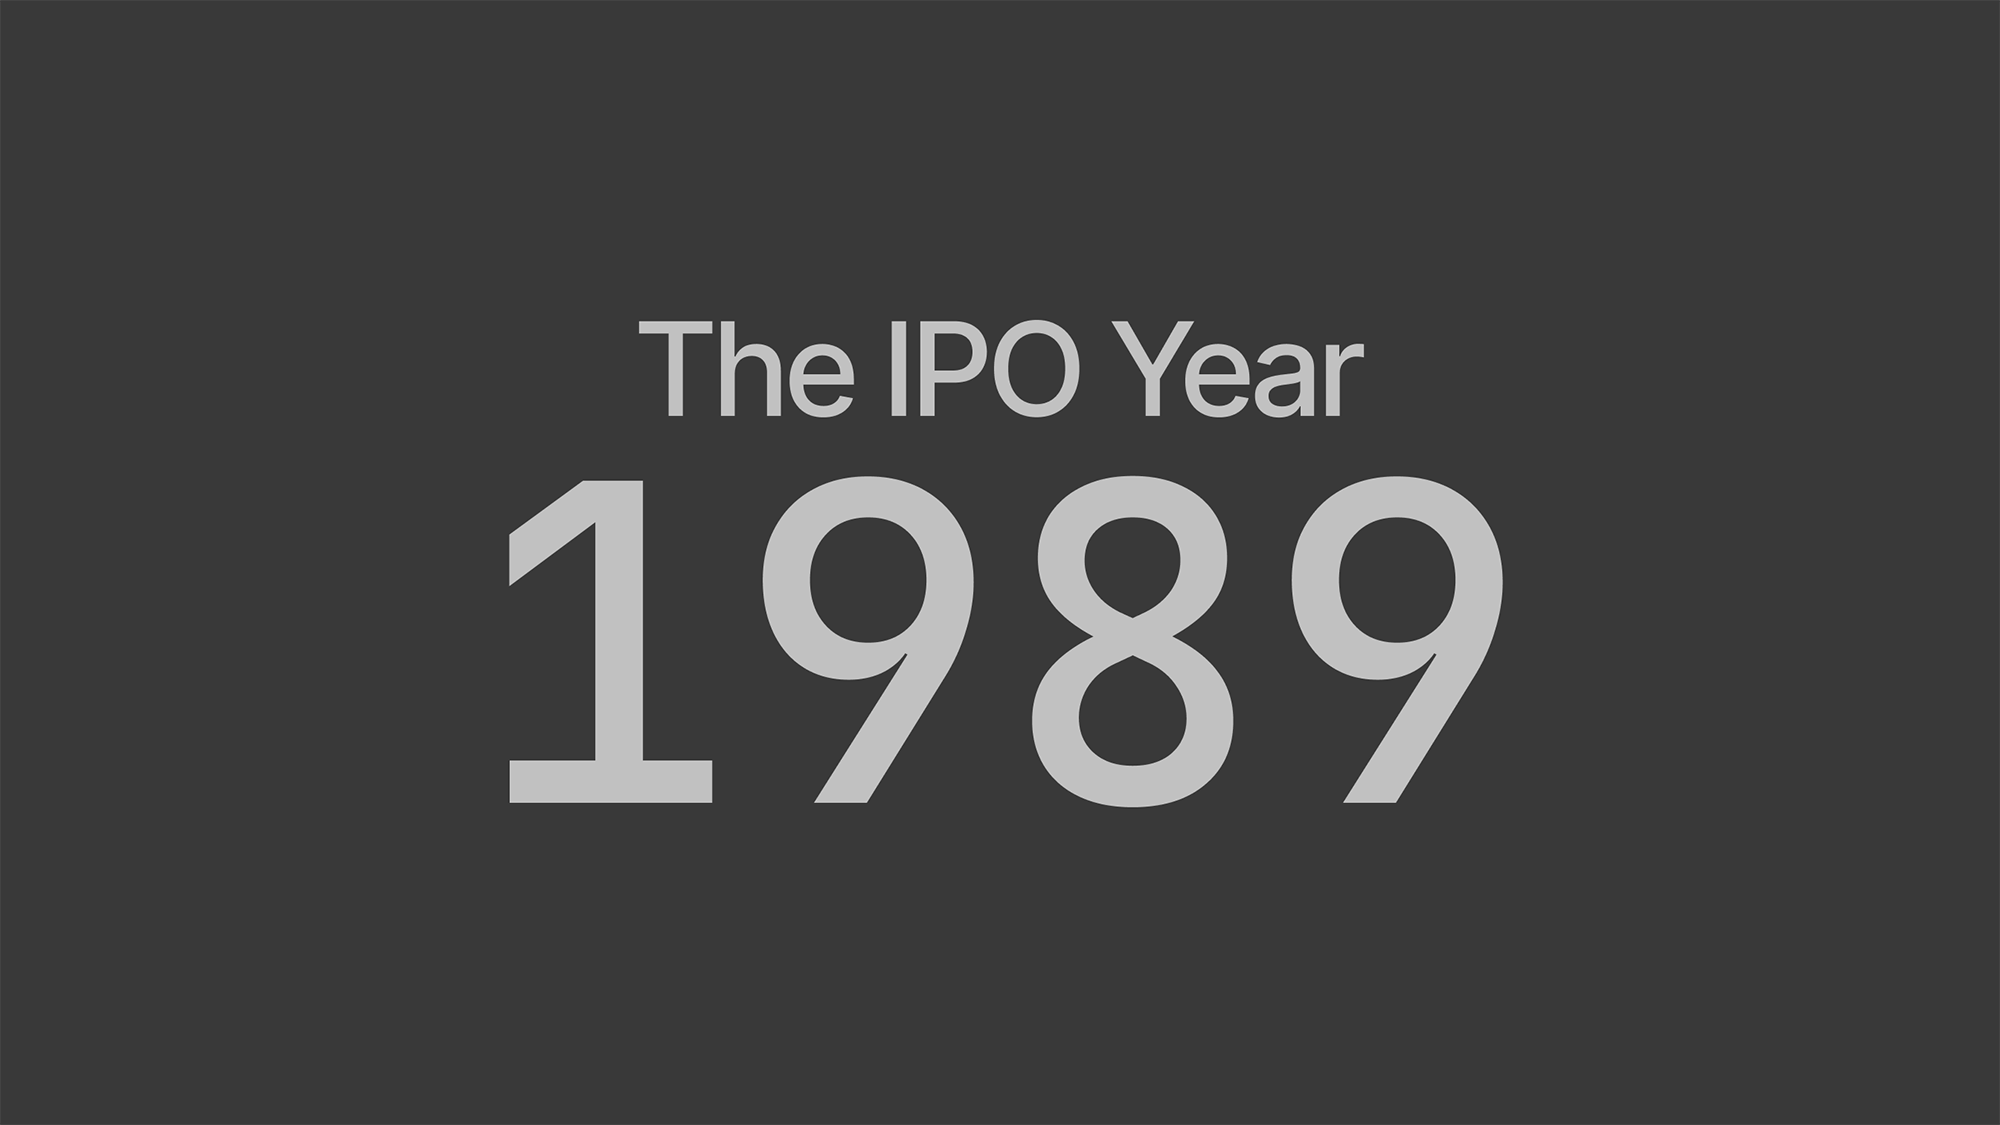 The IPO Year 1989